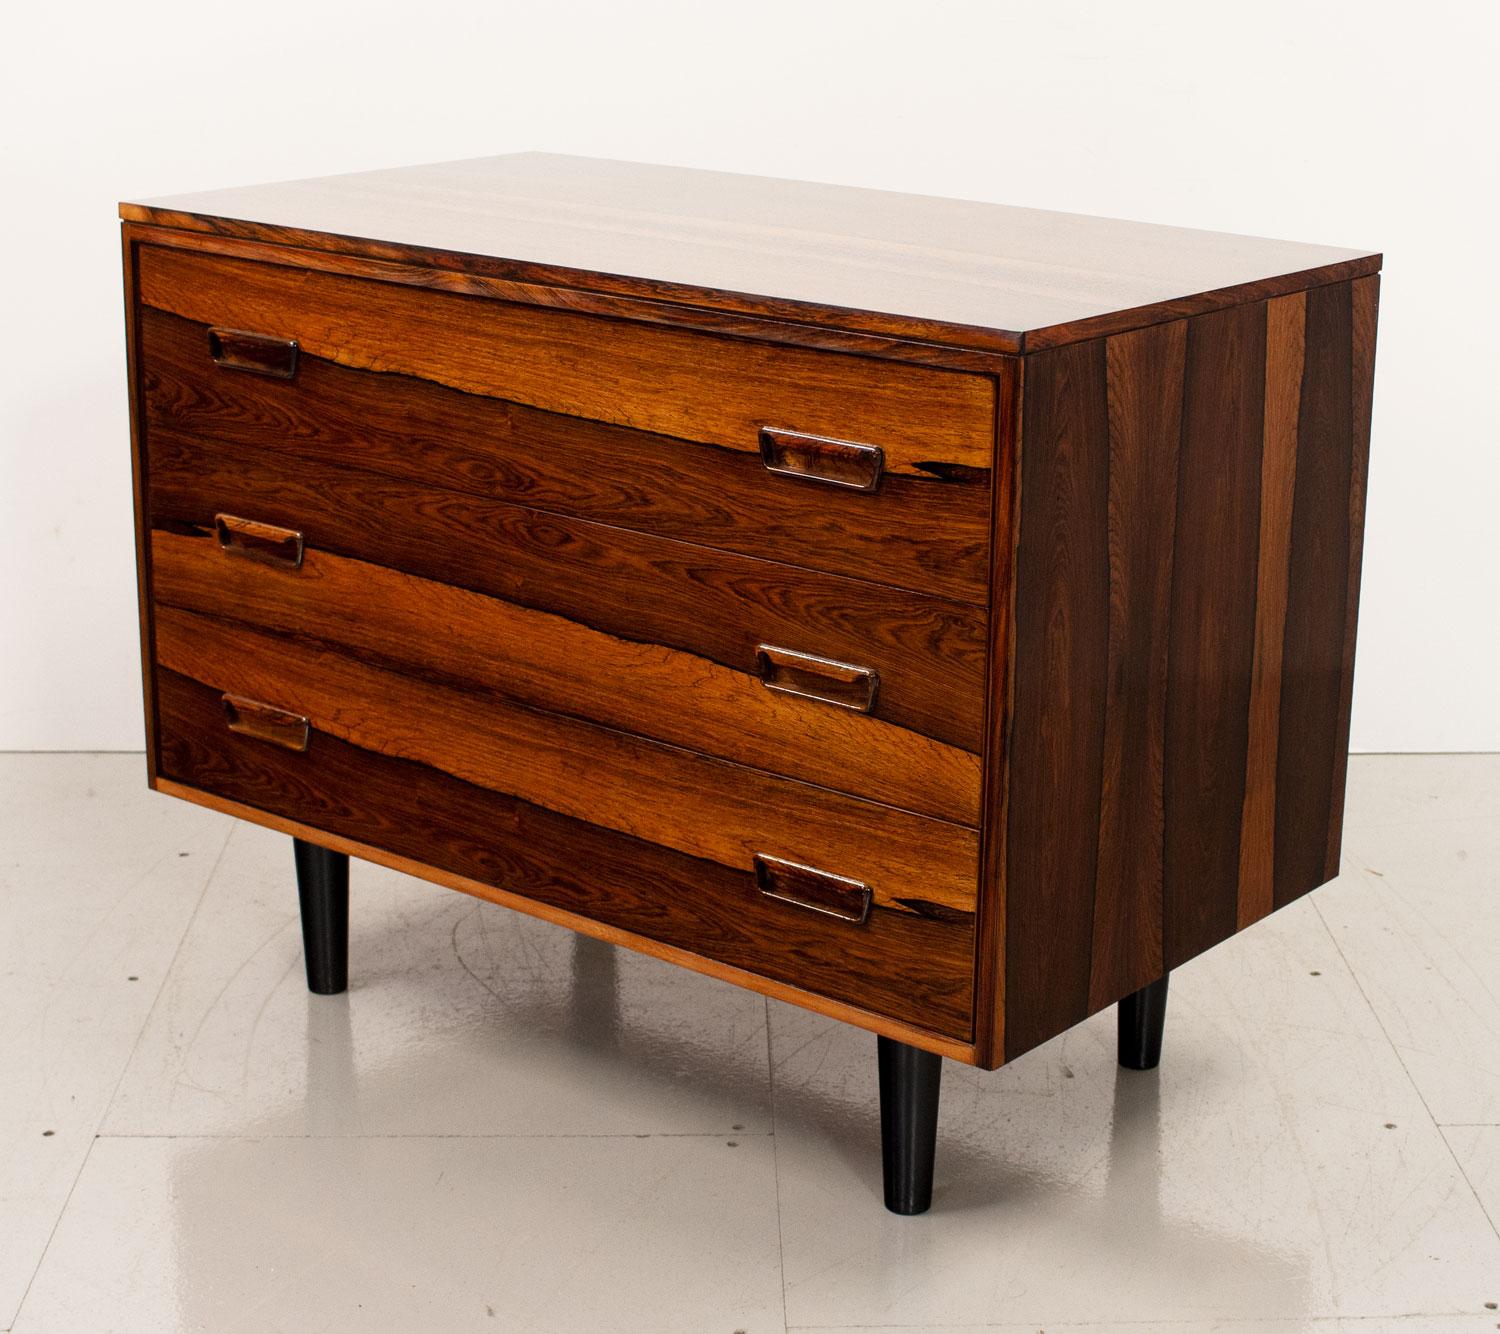 1960s Danish  rosewood chest of drawers designed in the manner of Arne Wahl Iversen. Made of a beautiful Brazilian rosewood with a stunning grain it has 3 good sized drawers on back legs.